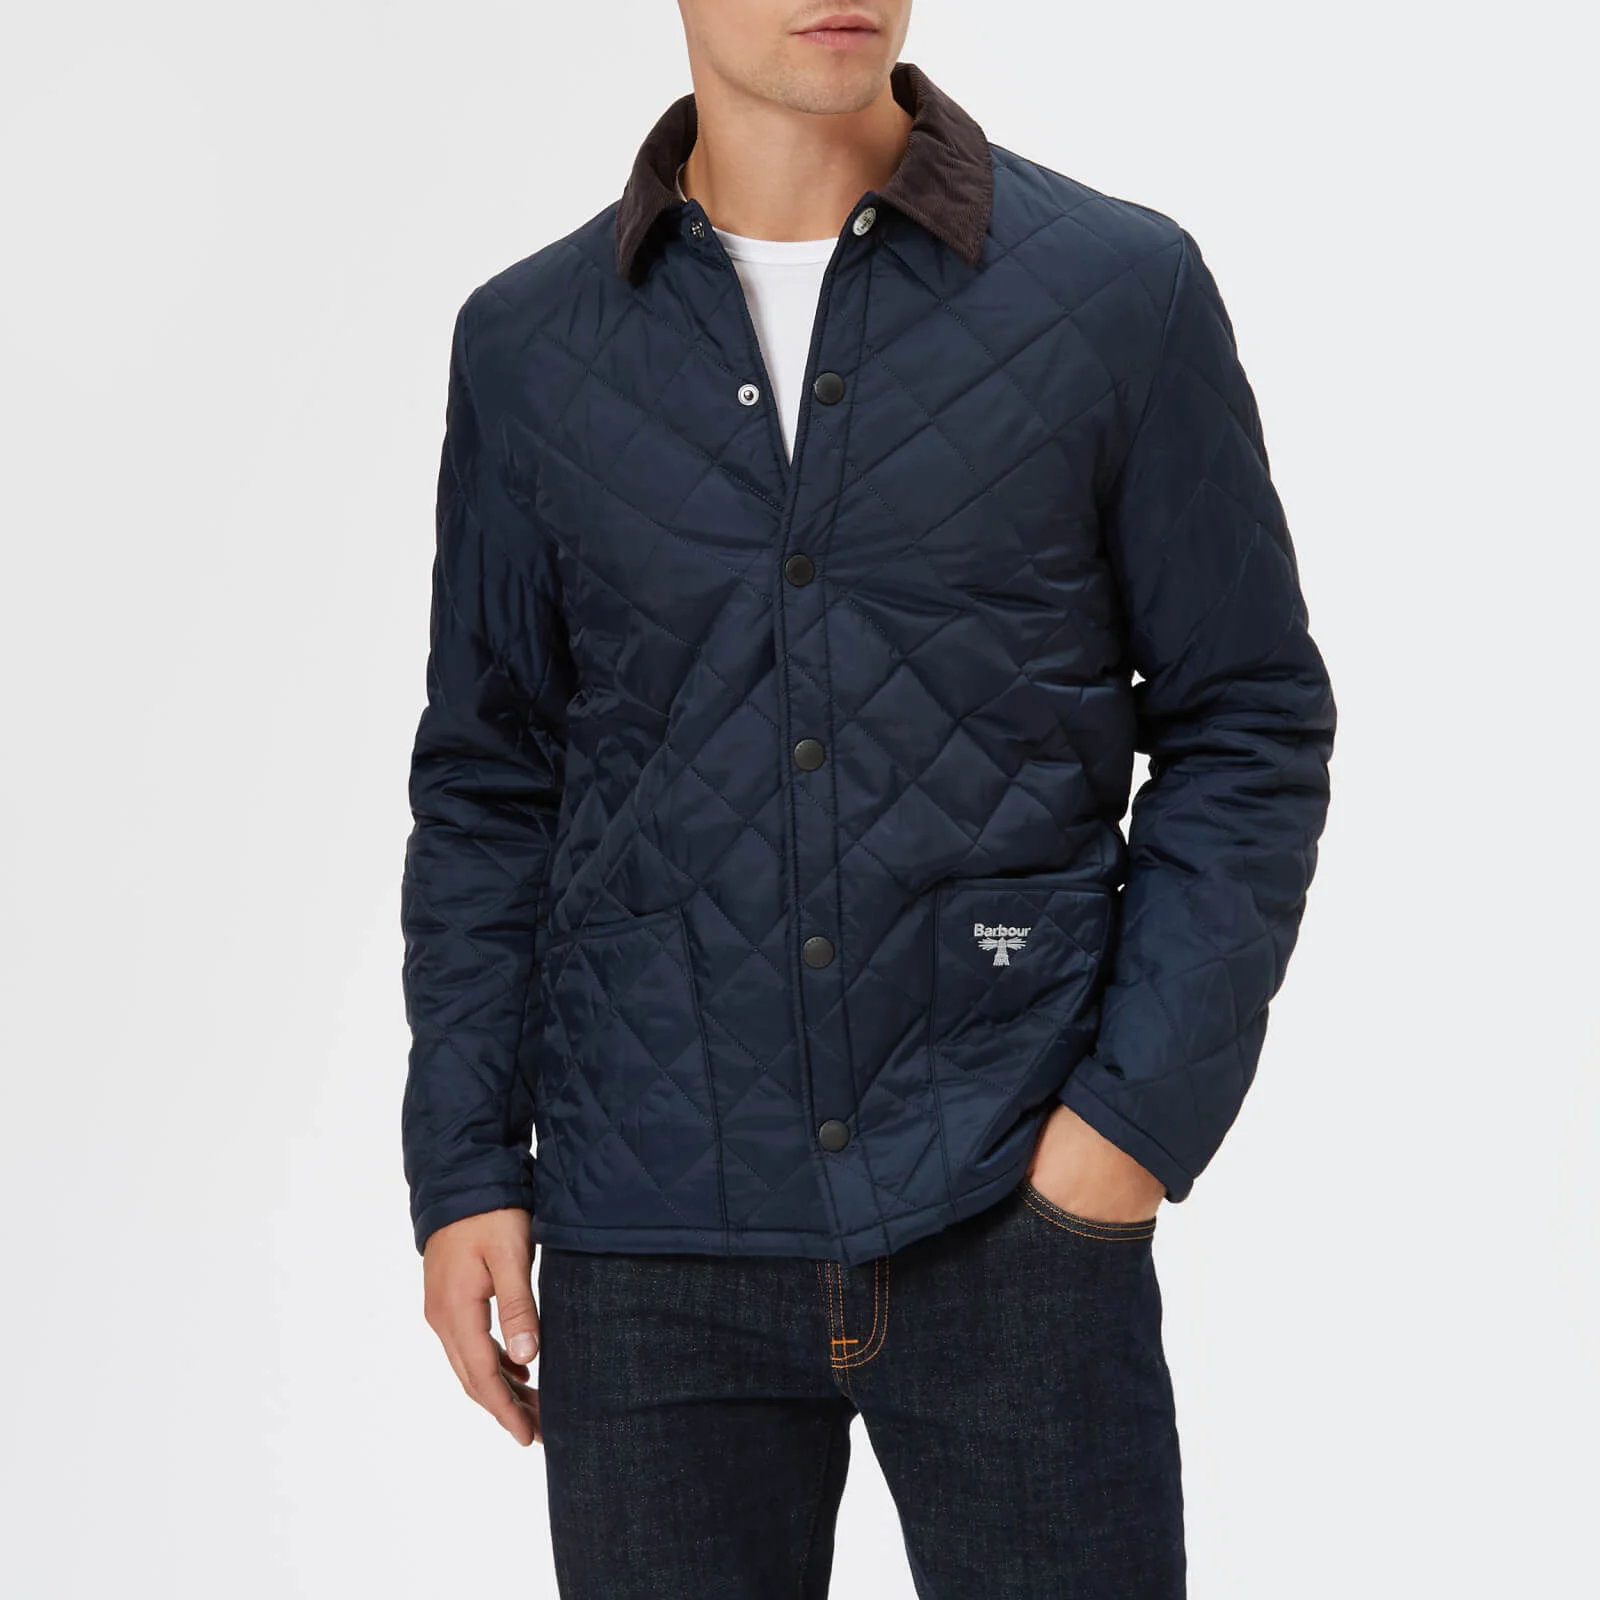 Barbour Men's Beacon Starling Quilted Jacket - Navy Image 1